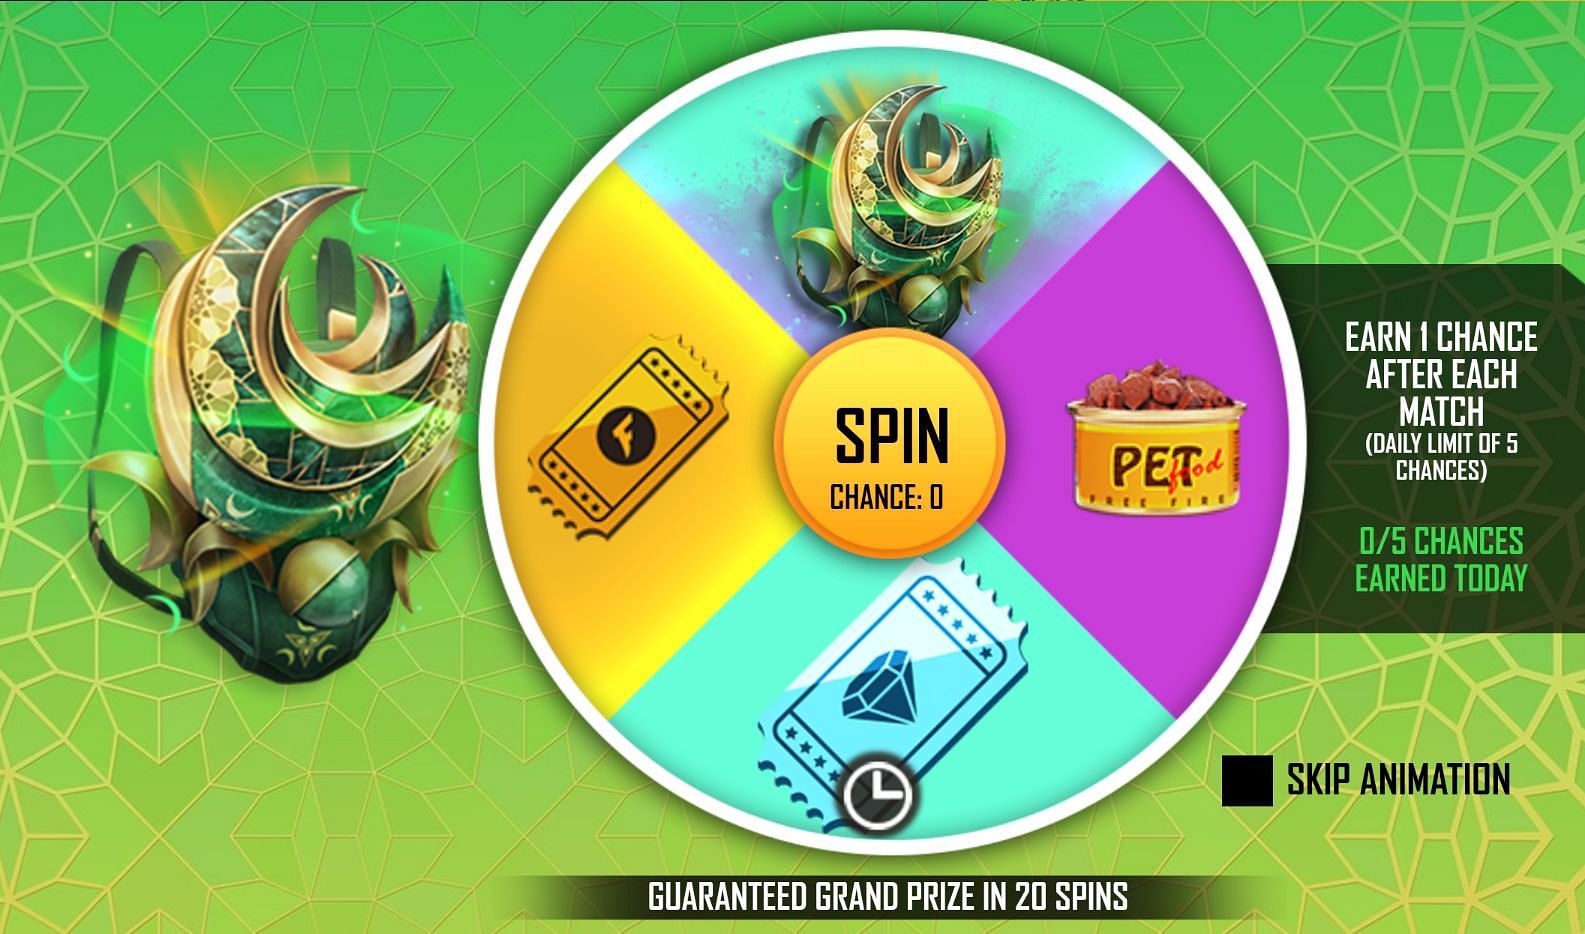 The grand prize can be claimed with a maximum of 20 spins (Image via Garena)